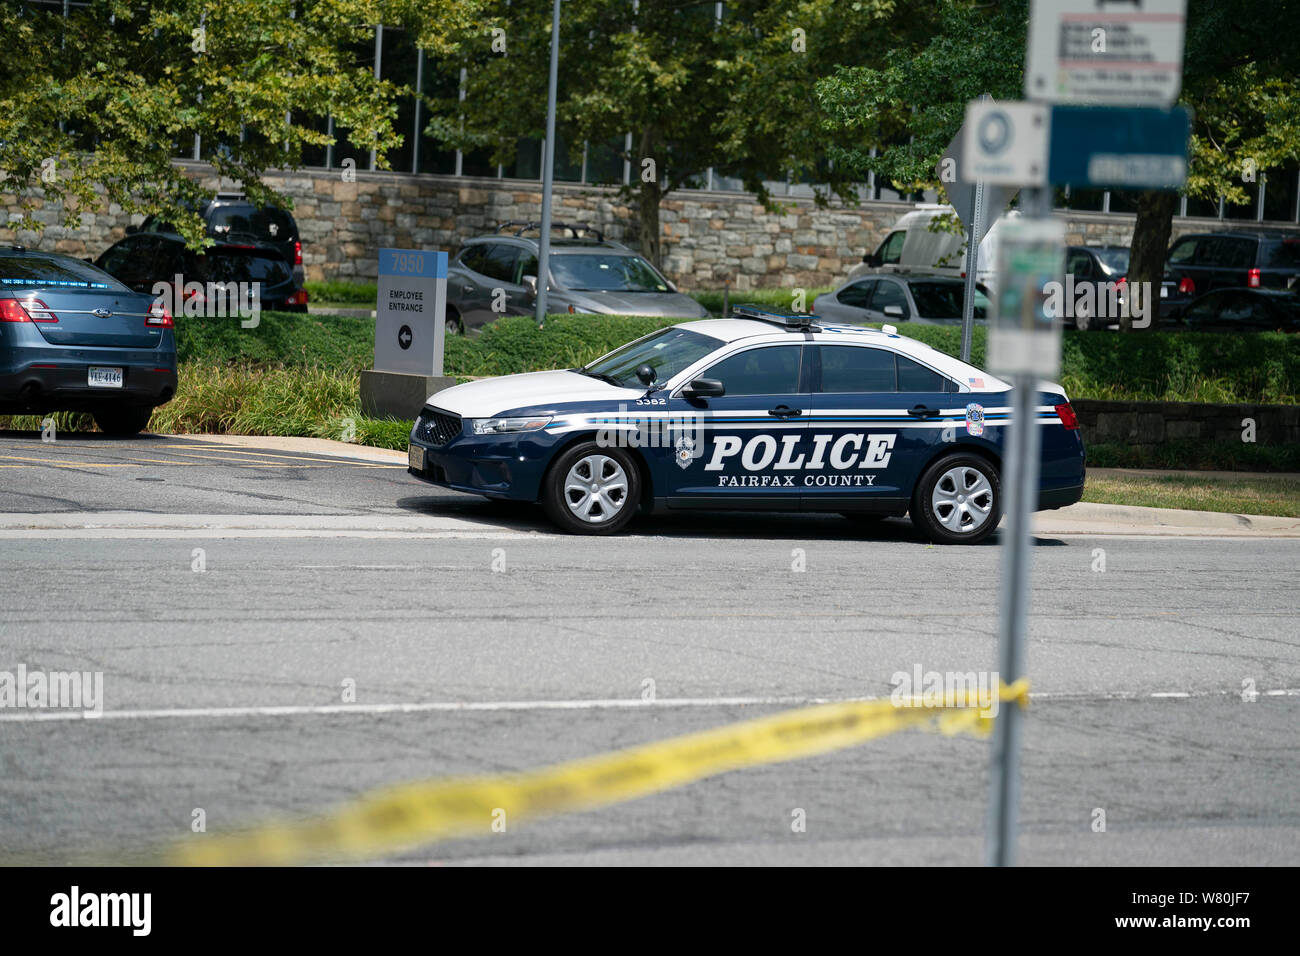 Mclean, USA. 7th Aug, 2019. A police car is seen at USA Today's headquarters in McLean, Virginia, the United States, on Aug. 7, 2019. USA Today's headquarters in McLean, Virginia was evacuated Wednesday following a probably mistaken police alert of a man with a weapon at the building in suburban Washington, DC, the newspaper said. Credit: Liu Jie/Xinhua/Alamy Live News Stock Photo